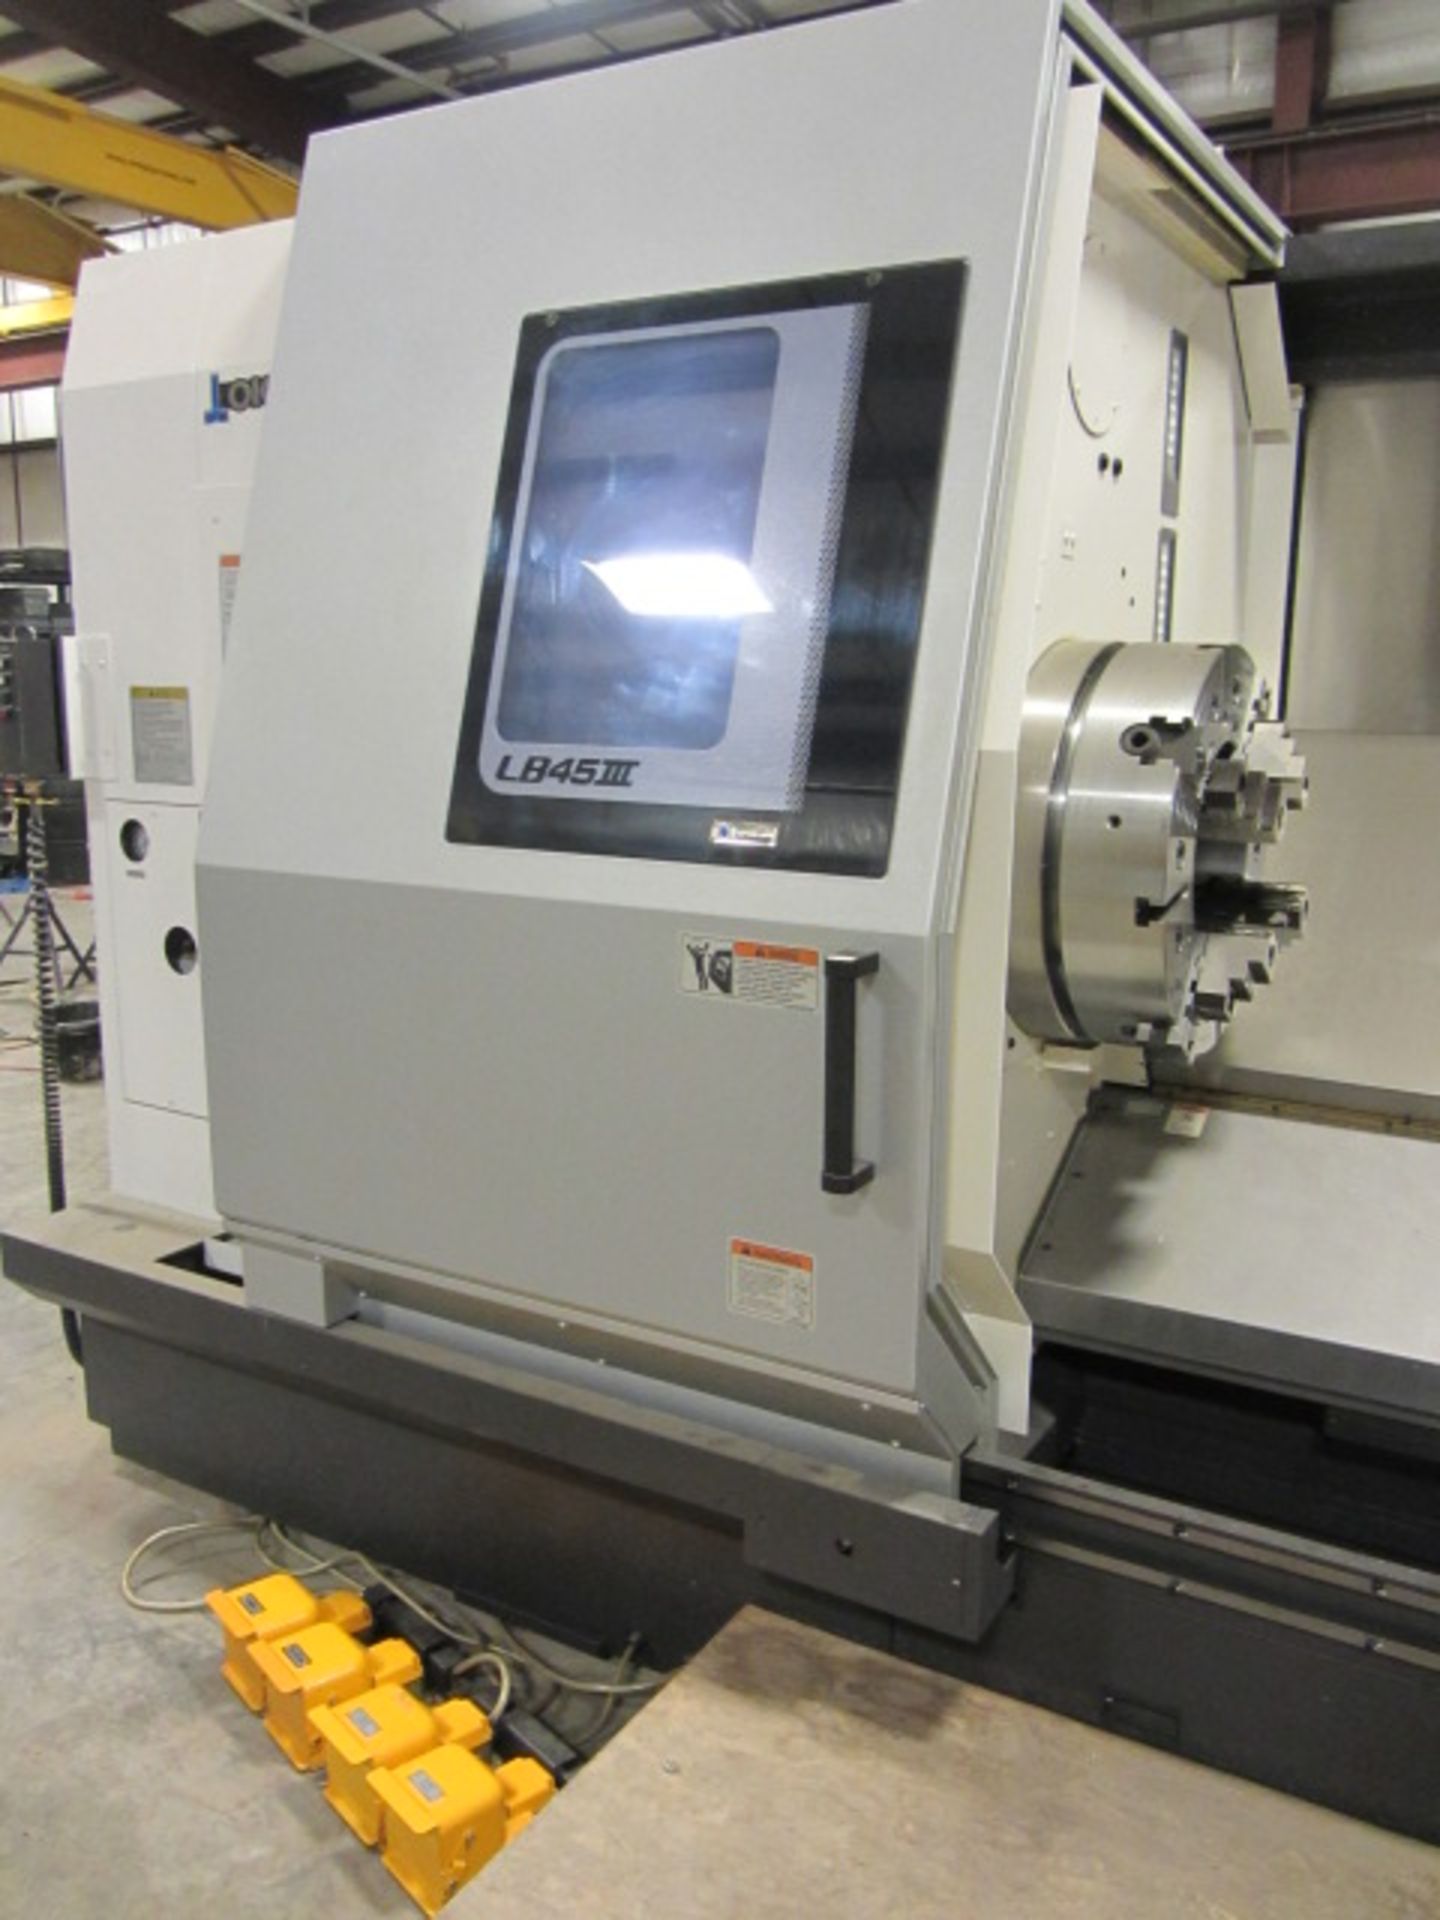 Okuma Model LB45II C2000 Hollow Spindle CNC Turning Center with Dual Front & Rear 24'' 4-Jaw Chucks, - Image 5 of 14